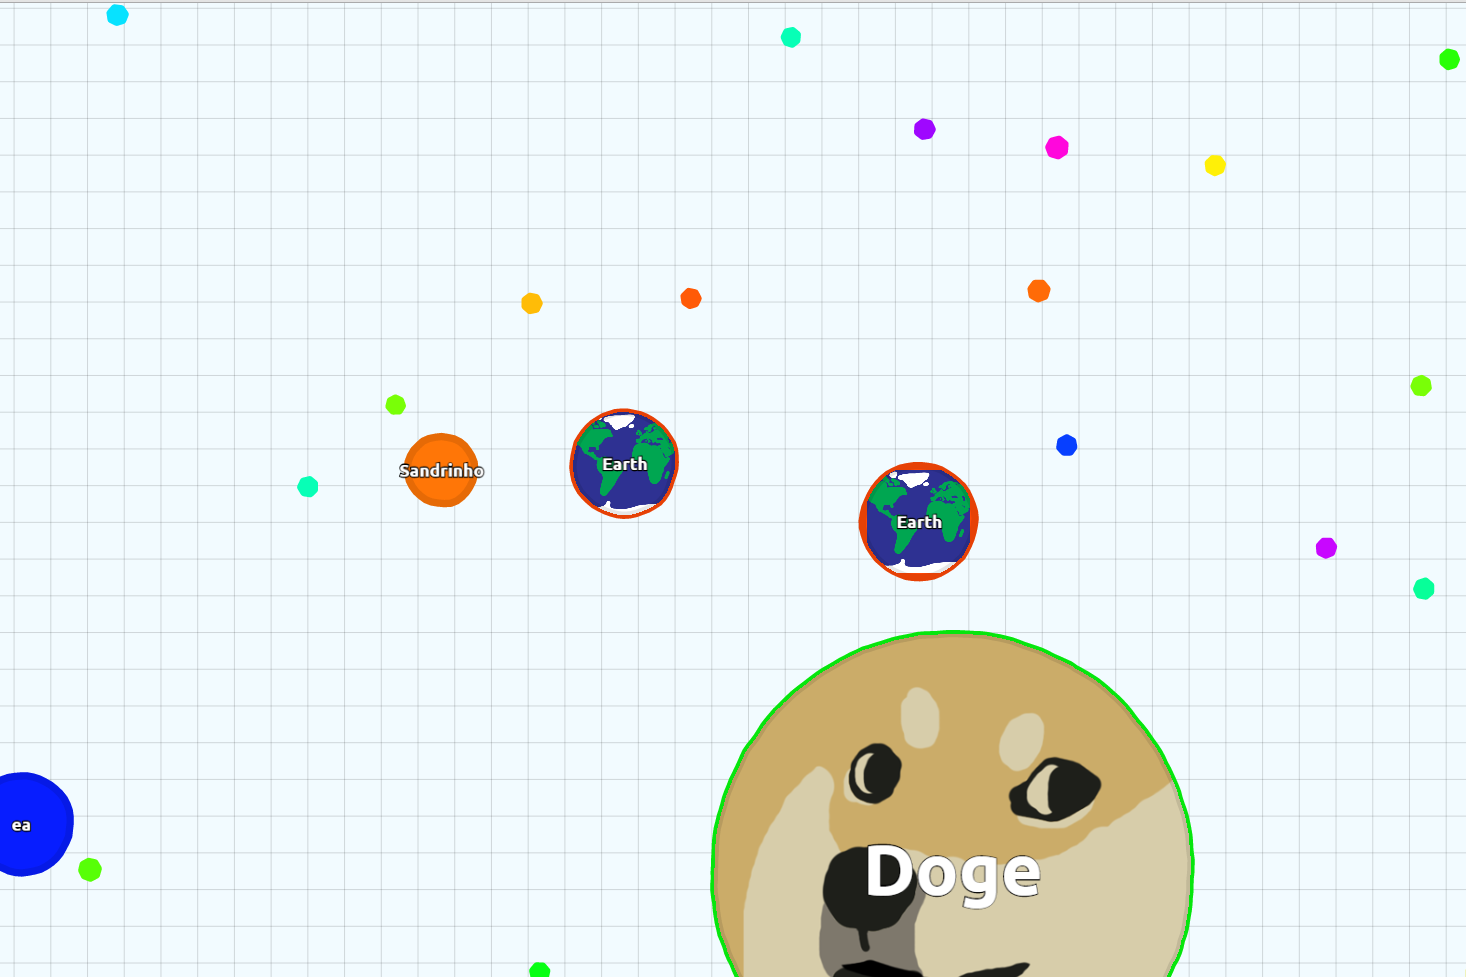 Agar.io: a guide to the hit game – and the best tips to win